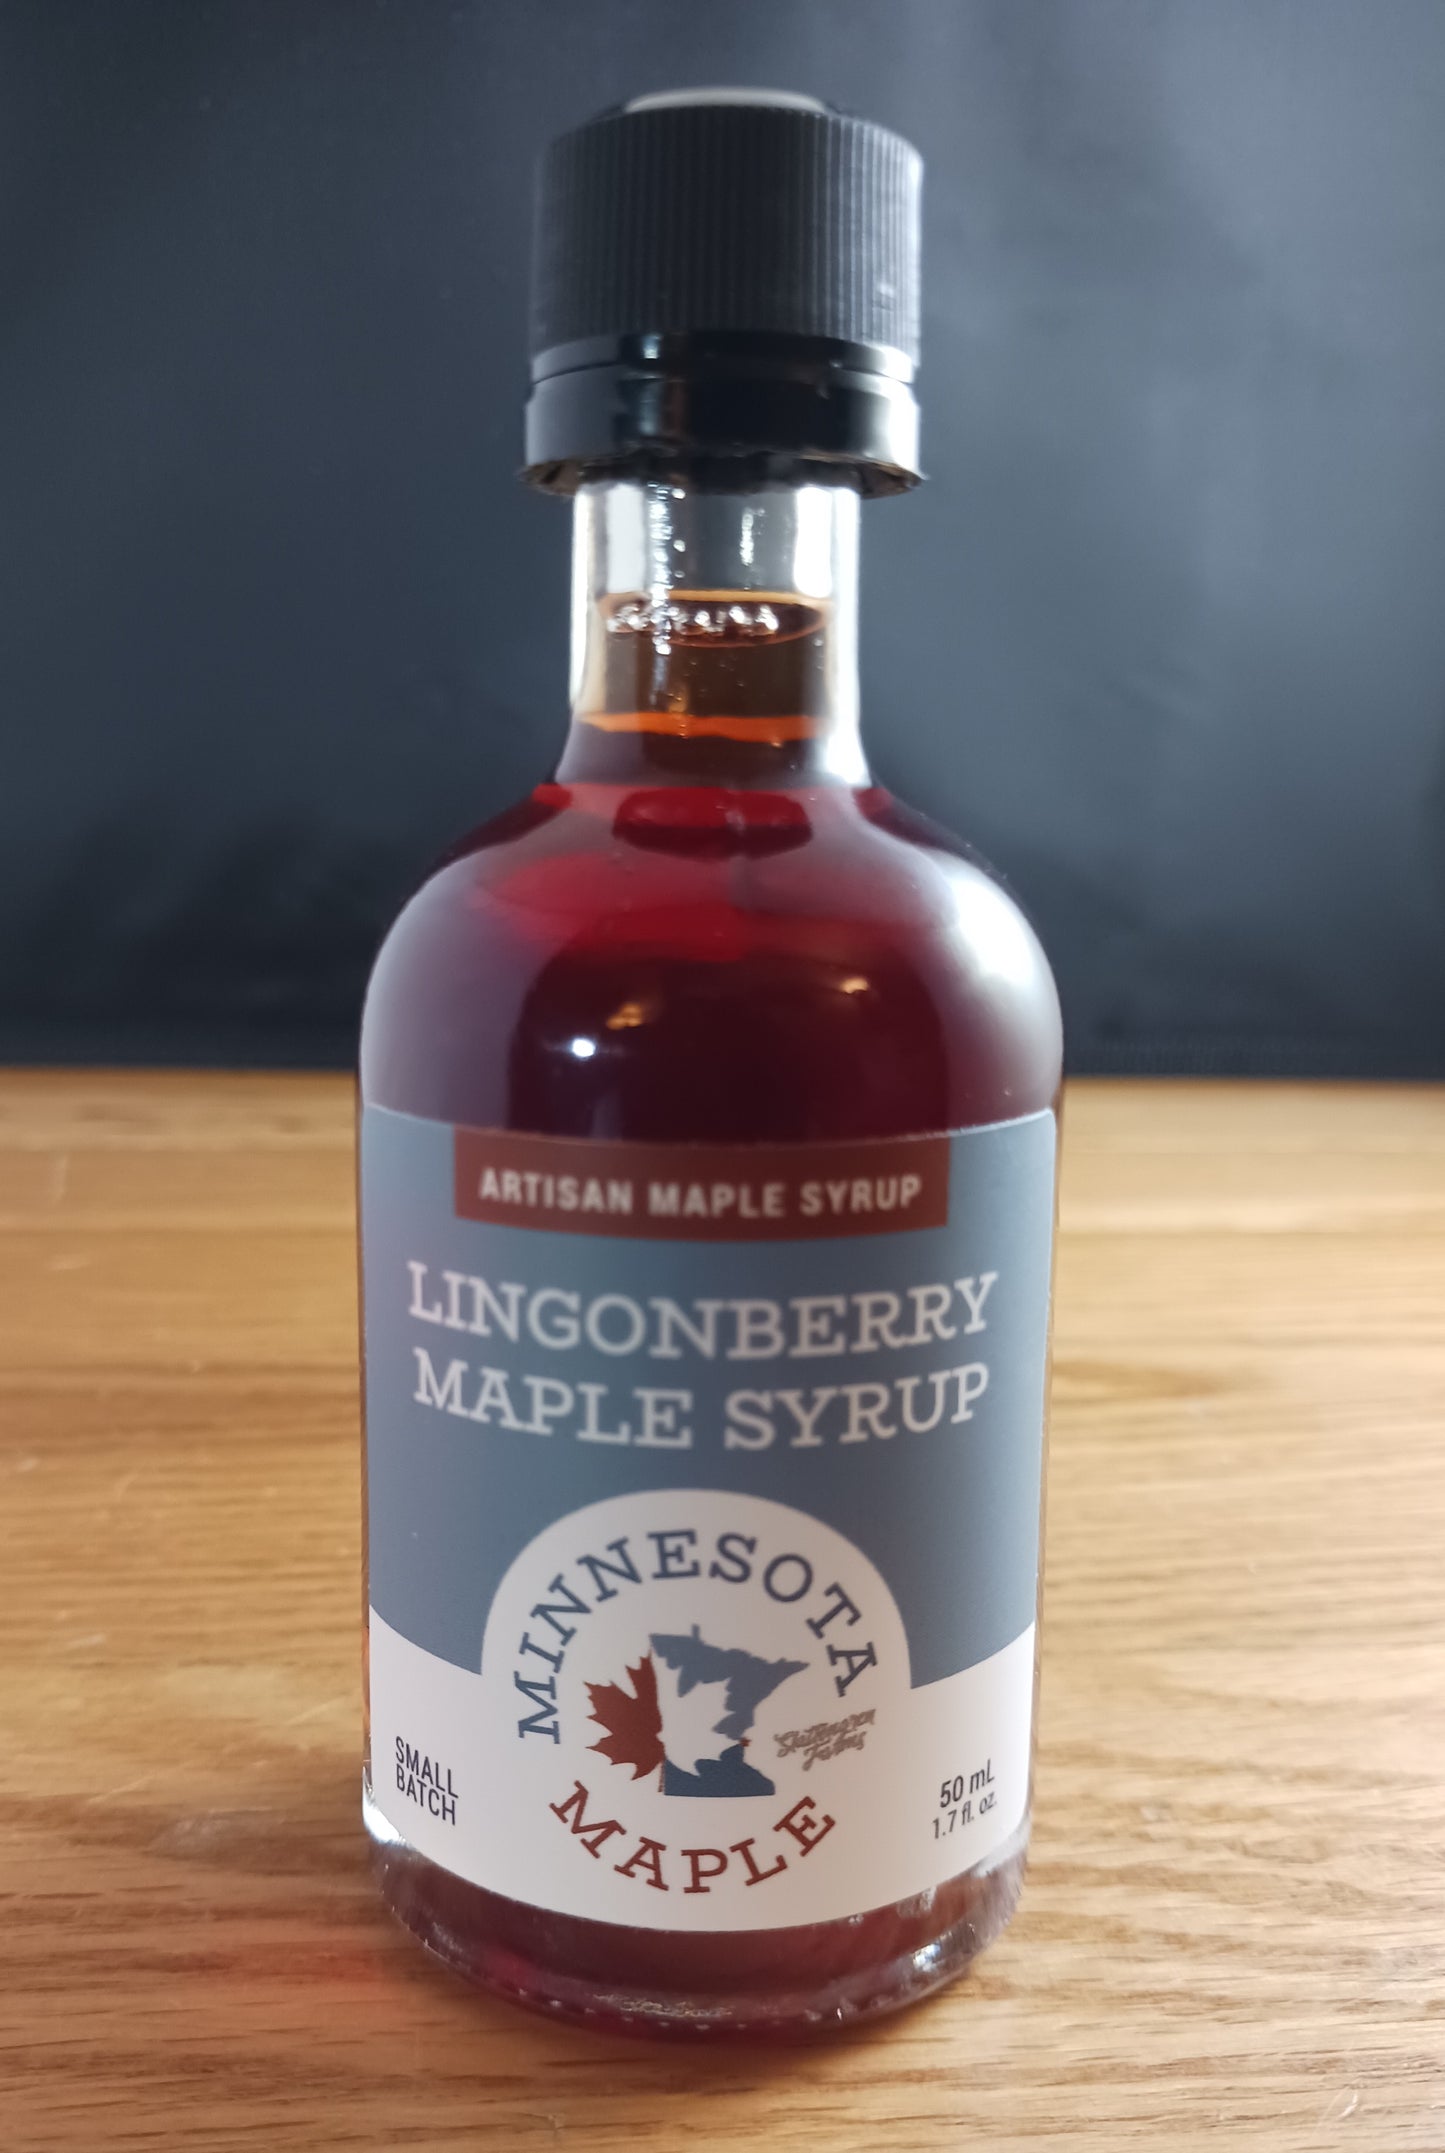 Lingonberry Maple Syrup